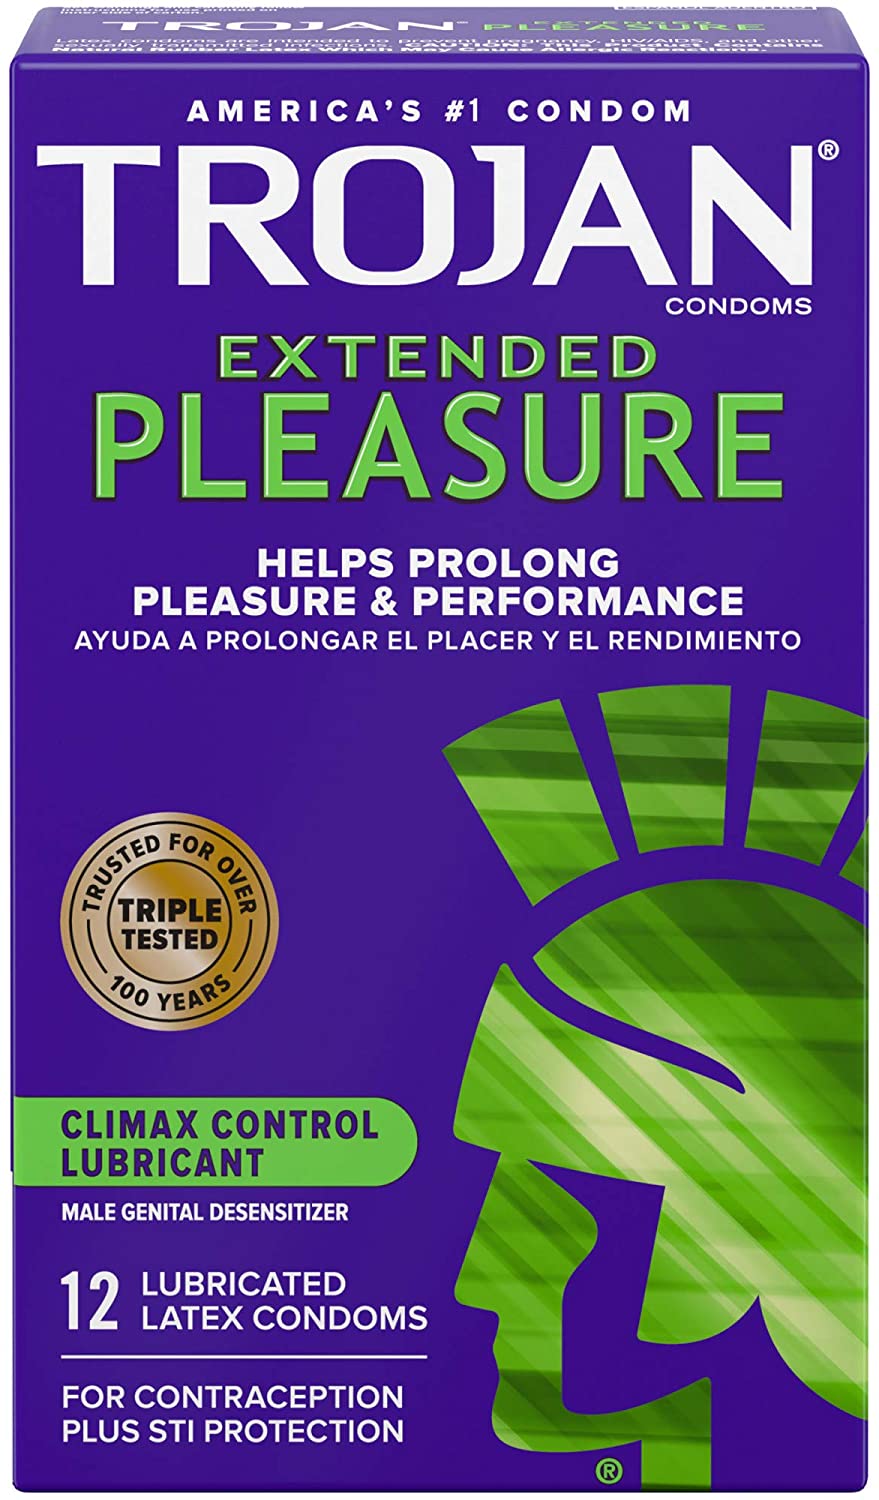 Trojan Extended Climax Control Condoms with Delay Lubricant, 12 Count (Pack of 1) $4.99 Shipped Amazon Prime Lowest Price can add to S&S as well  55% off